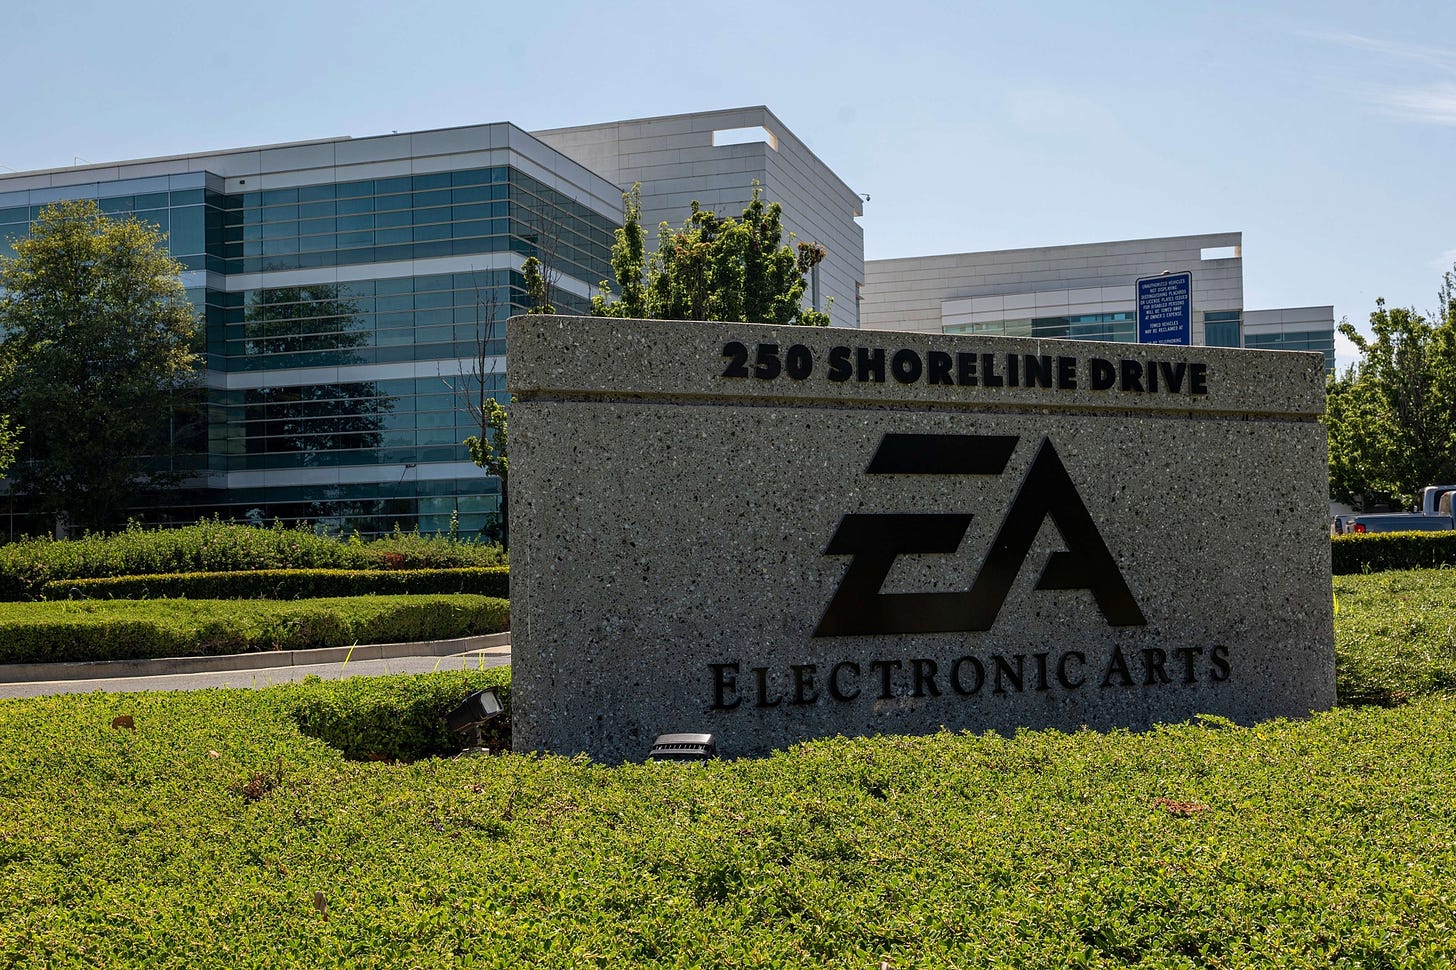 EA Sports College Football: What's the Latest? - Bloomberg